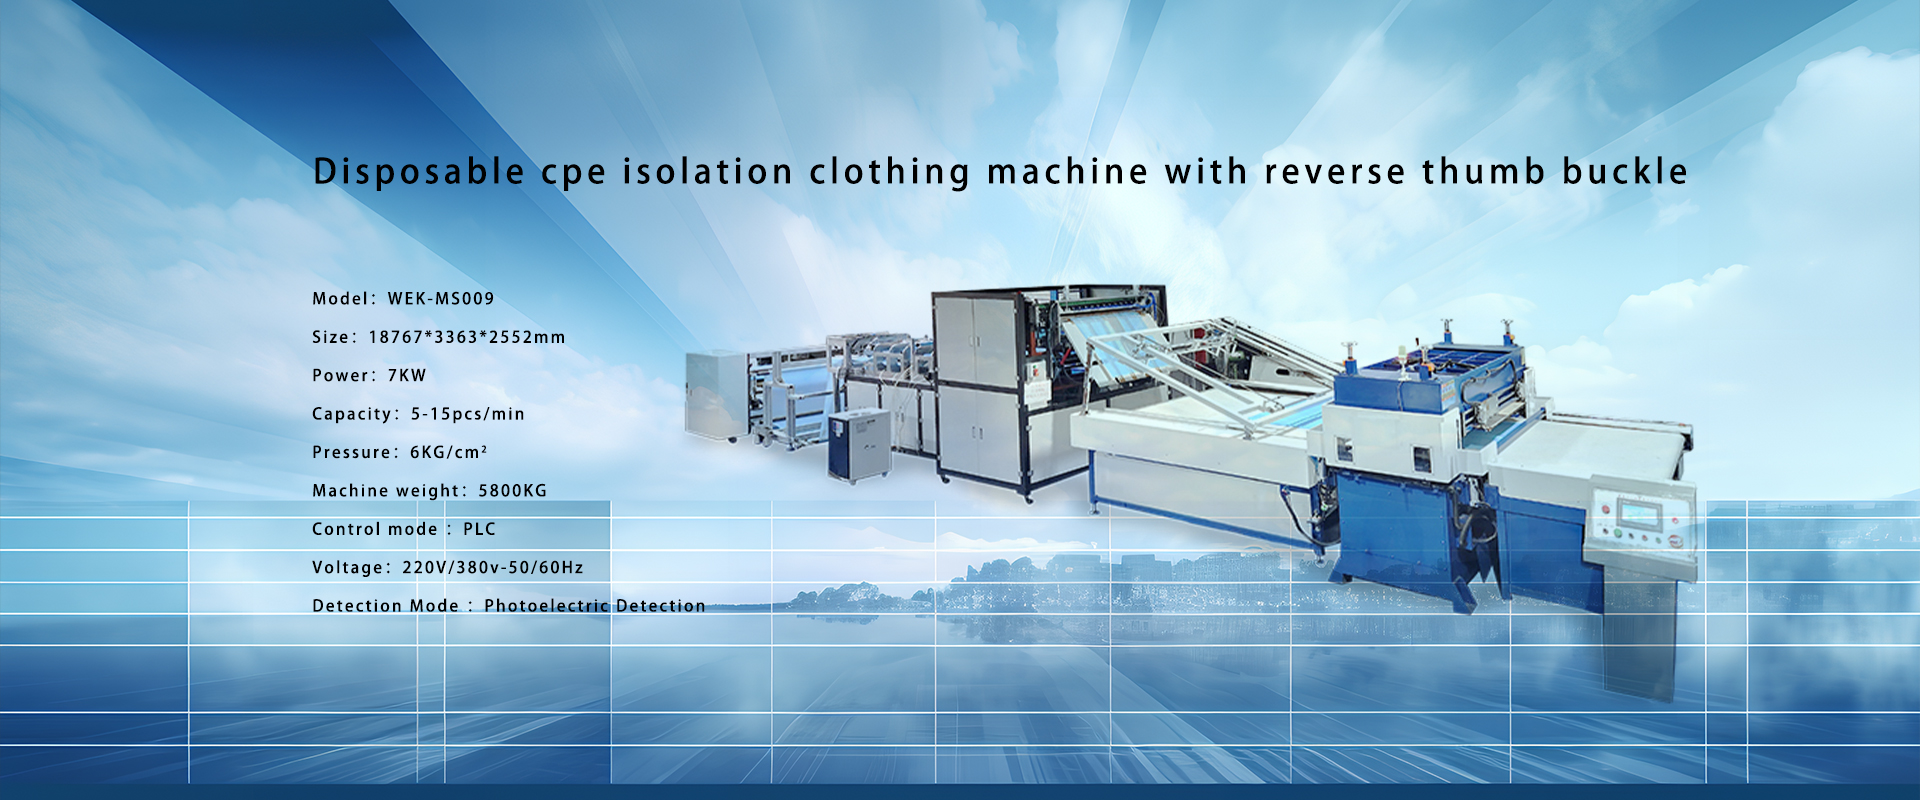 Disposable cpe isolation clothing machine with reverse thumb buckle